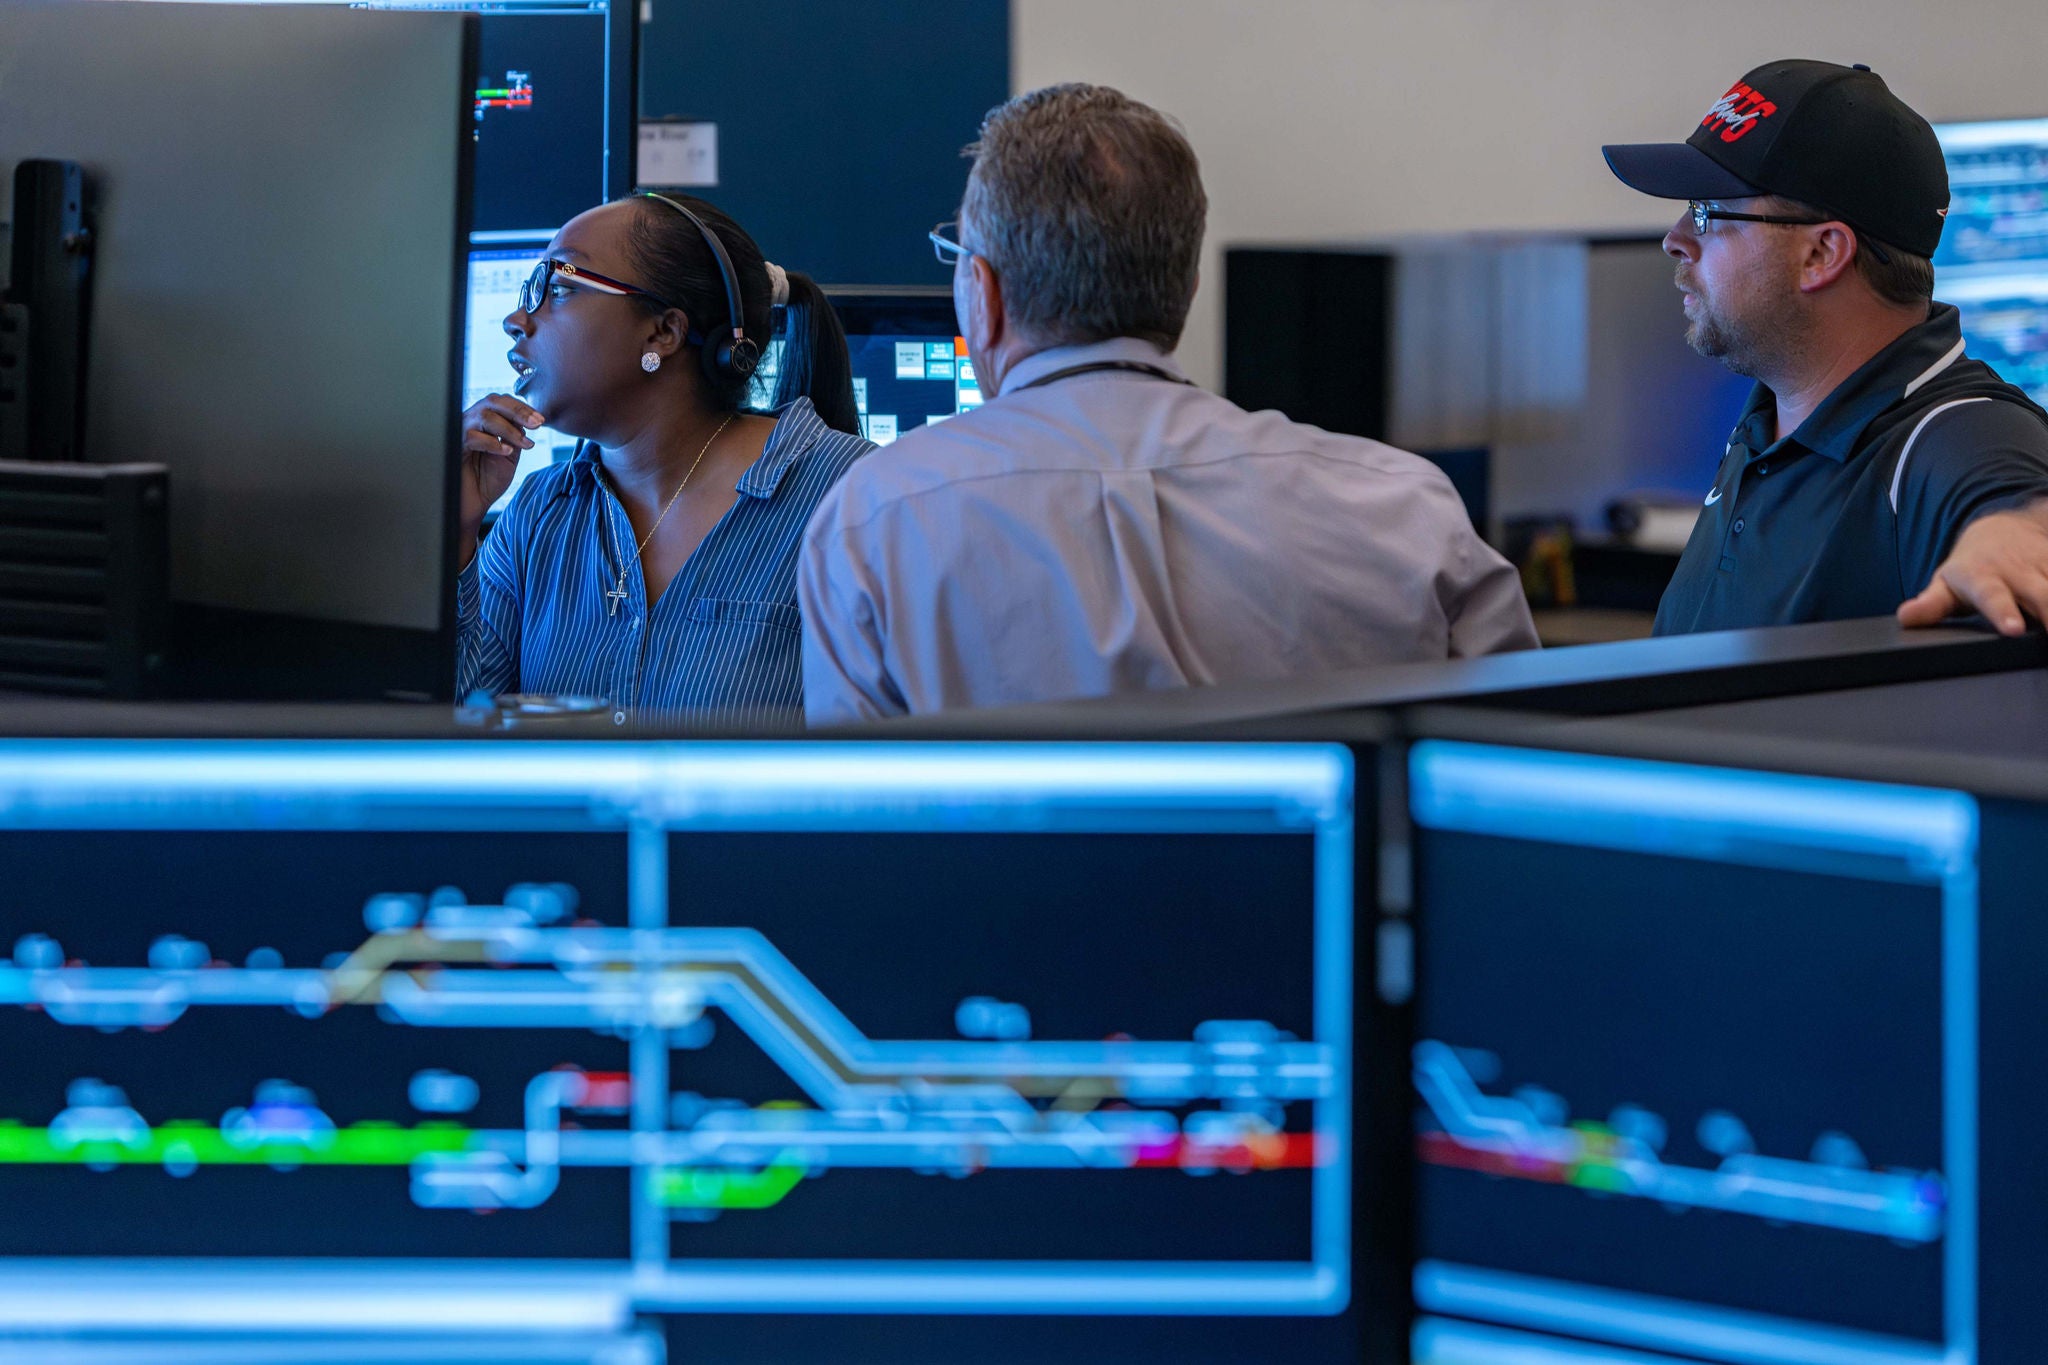 Three Norfolk Southern employees working at the company technology office gather around computers and discuss infrastructure technology plans.